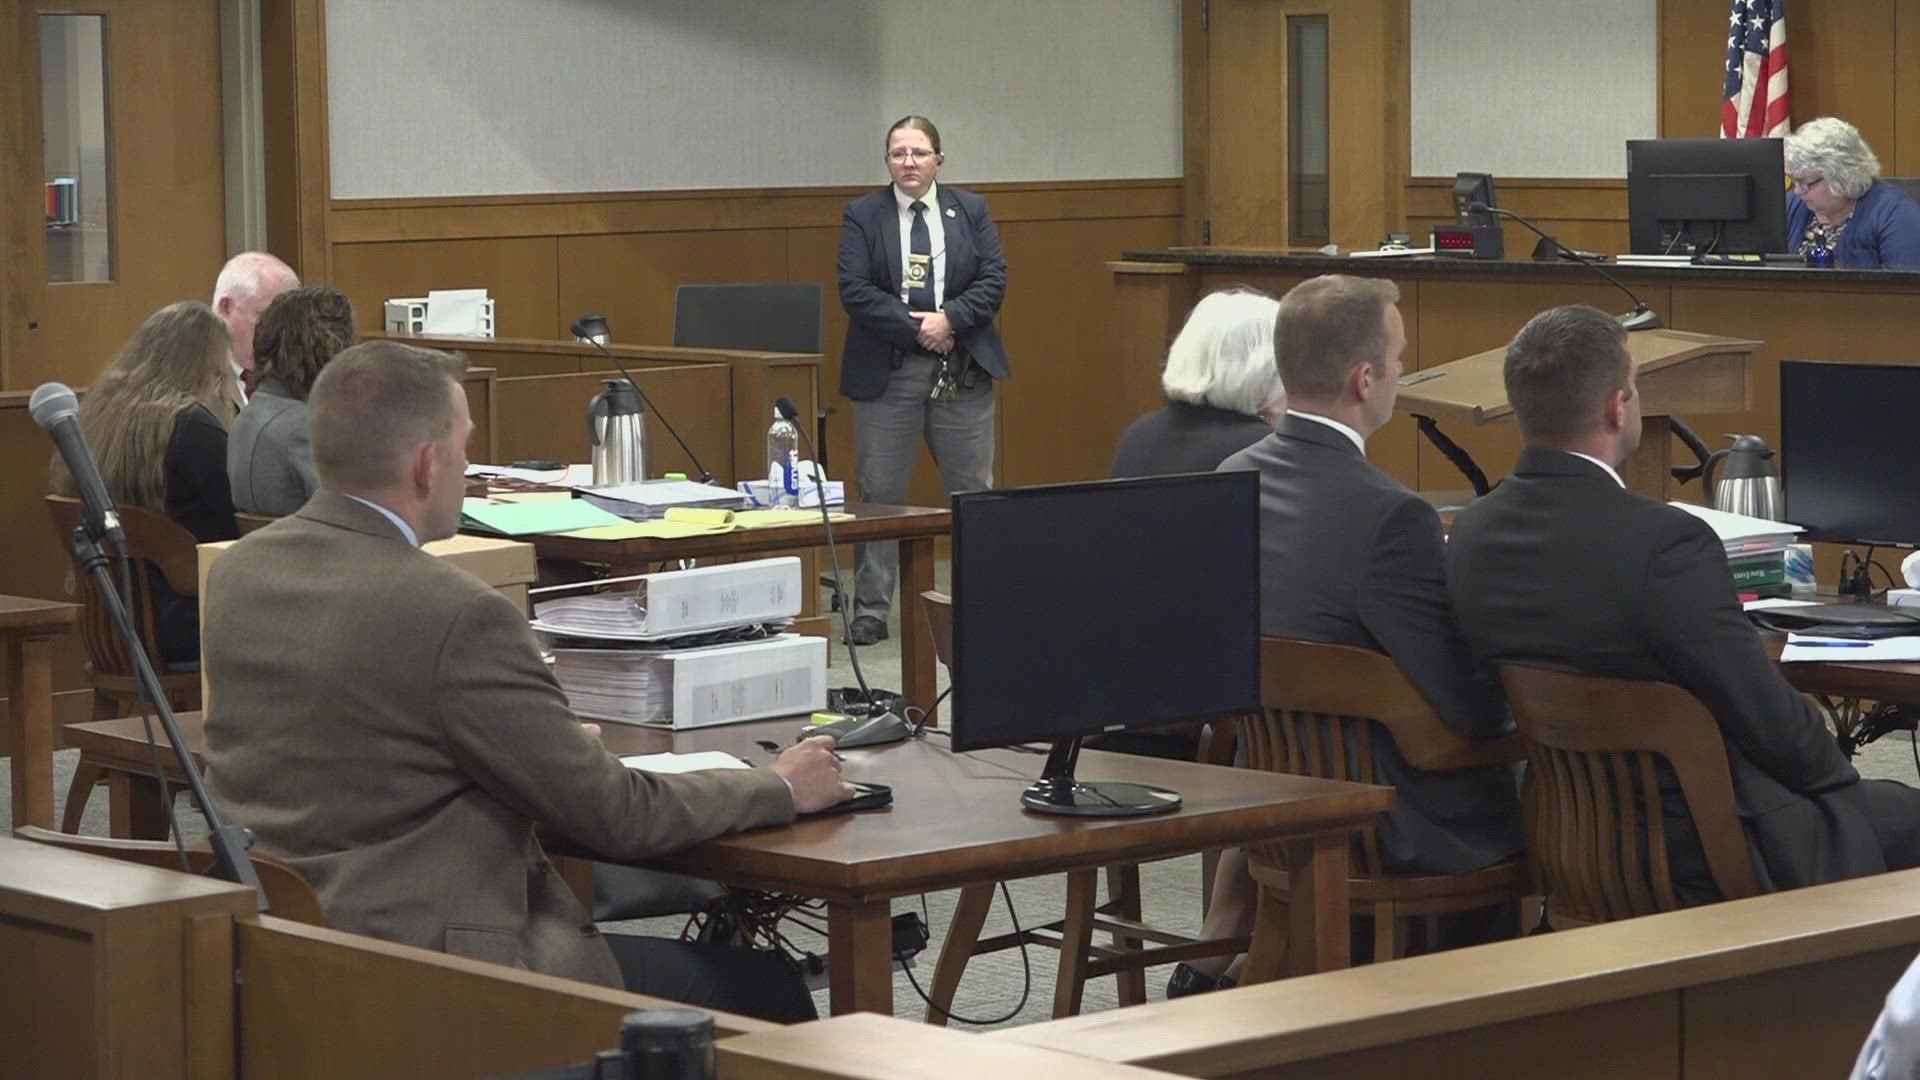 Jessica Trefethan is pleading not guilty to depraved indifference murder in connection to the death of her three-year-old son, Maddox, in June 2021.